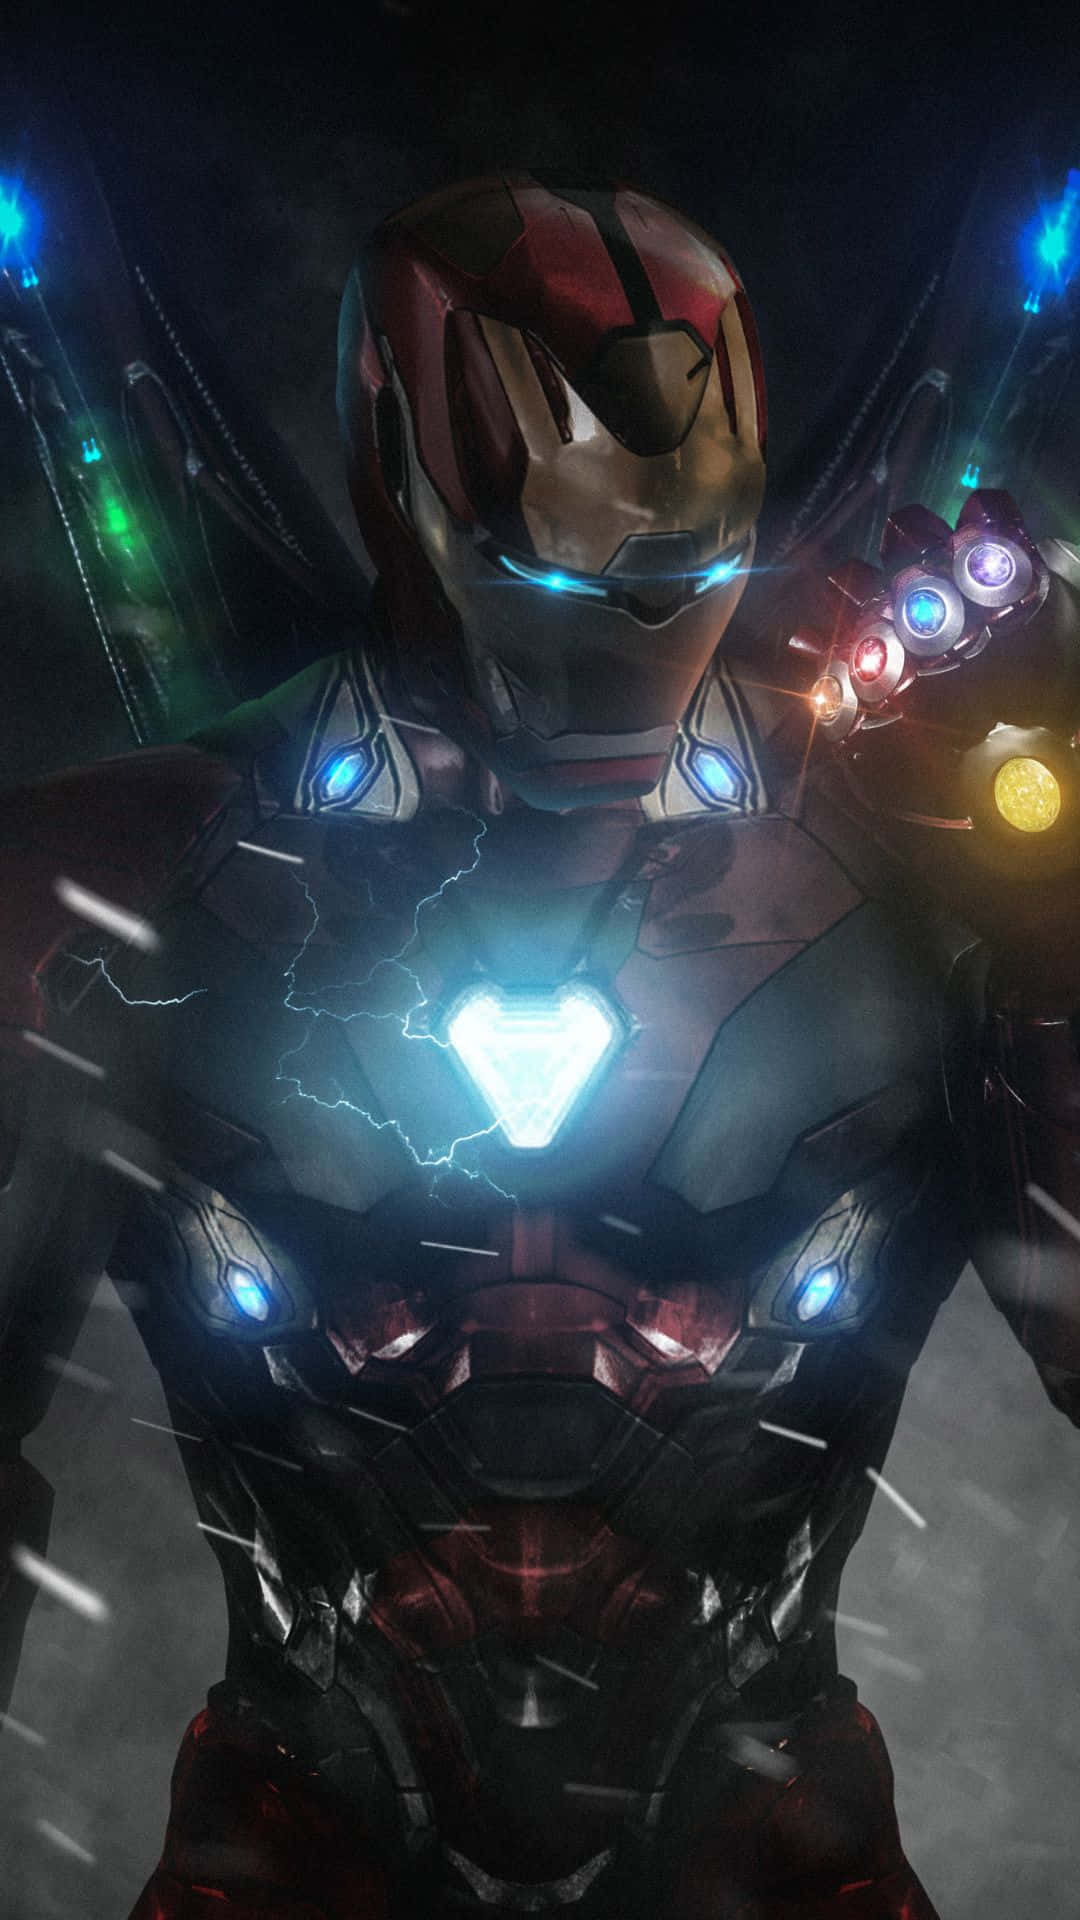 "Android Iron Man ready for battle!"